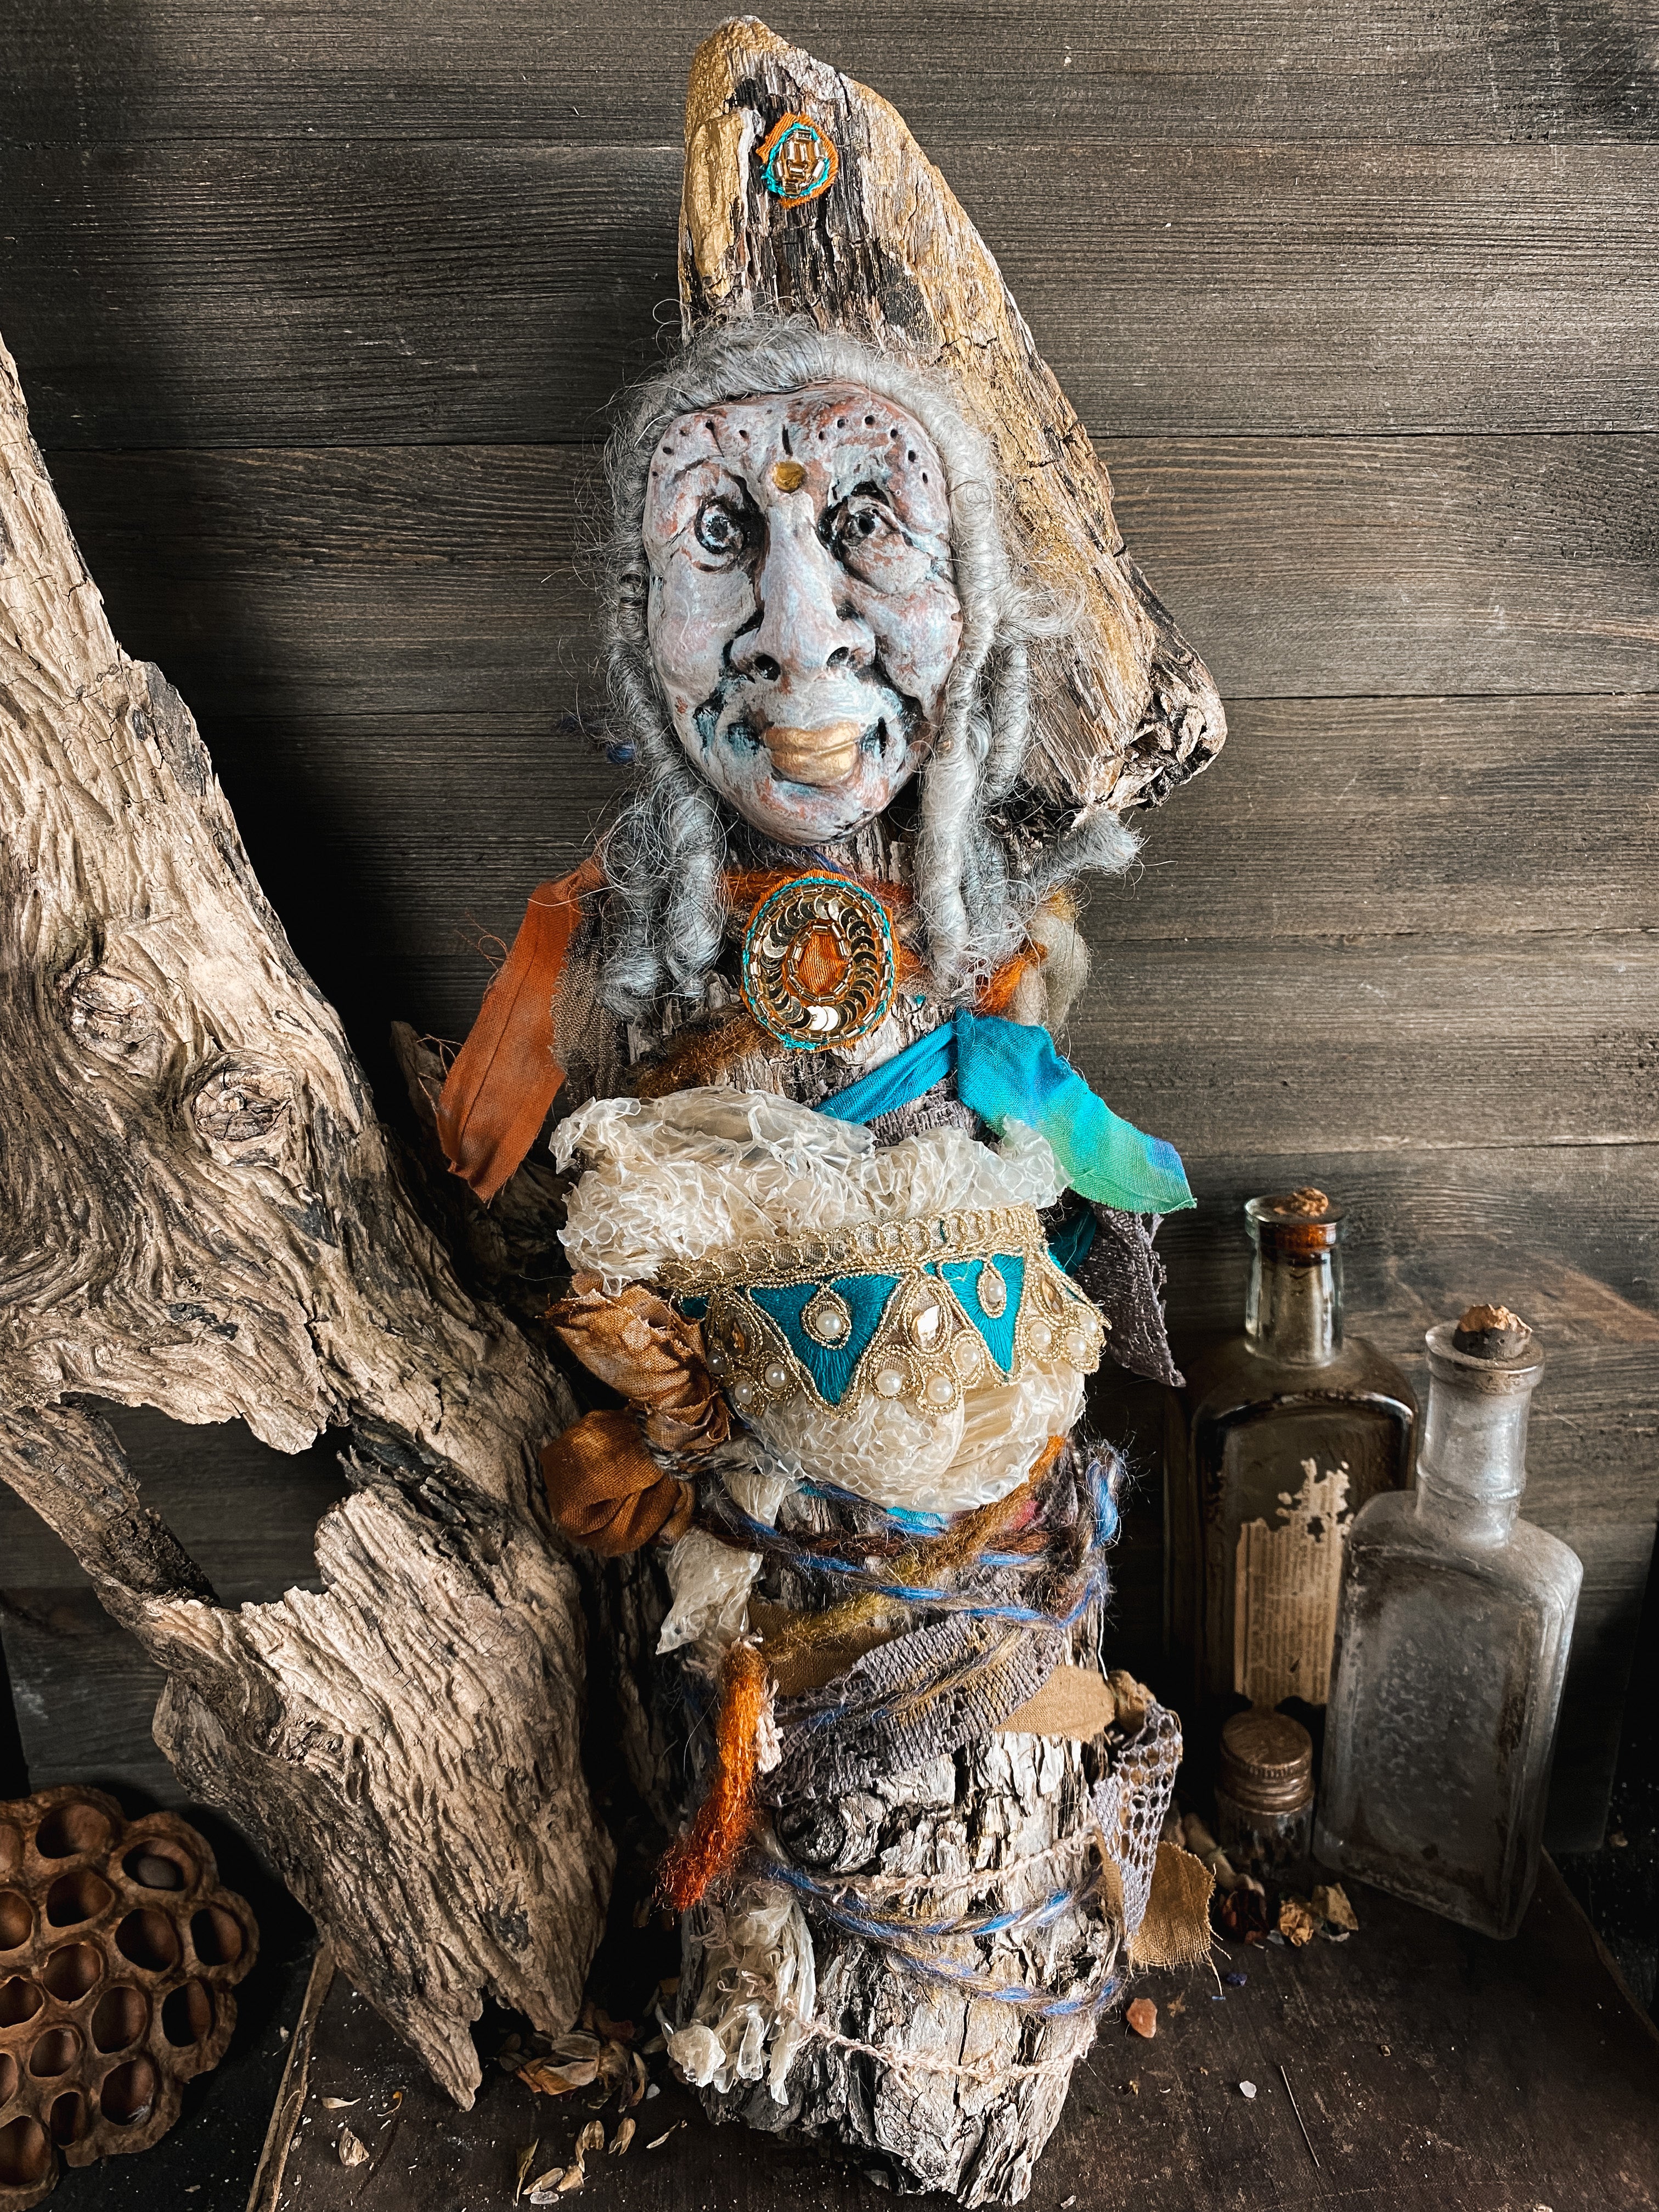 She of Connection - Sacred Medicine Doll for Connection to Self, Nature People, Purpose and All that Is